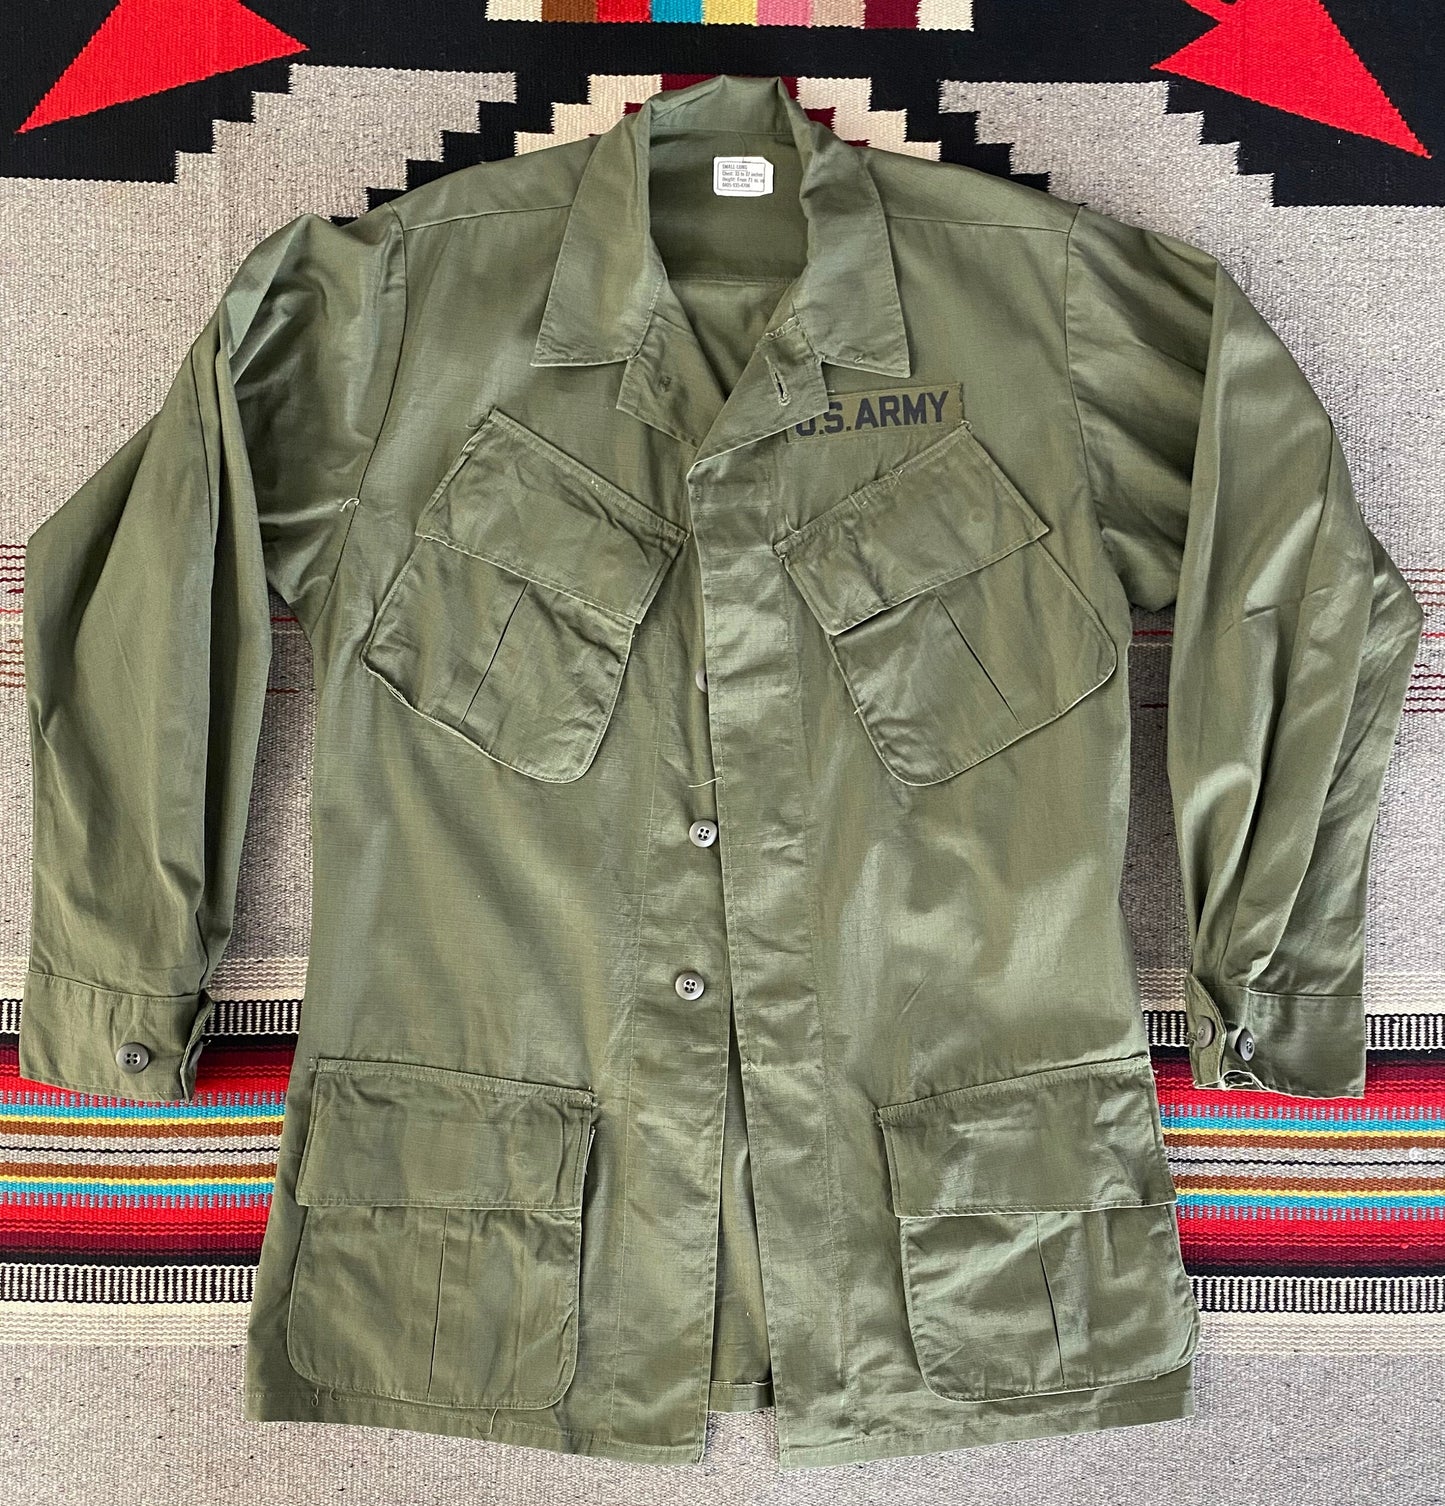 Small Long. Authentic 1969 US Army Vintage tropical Vietnam  jungle jacket.